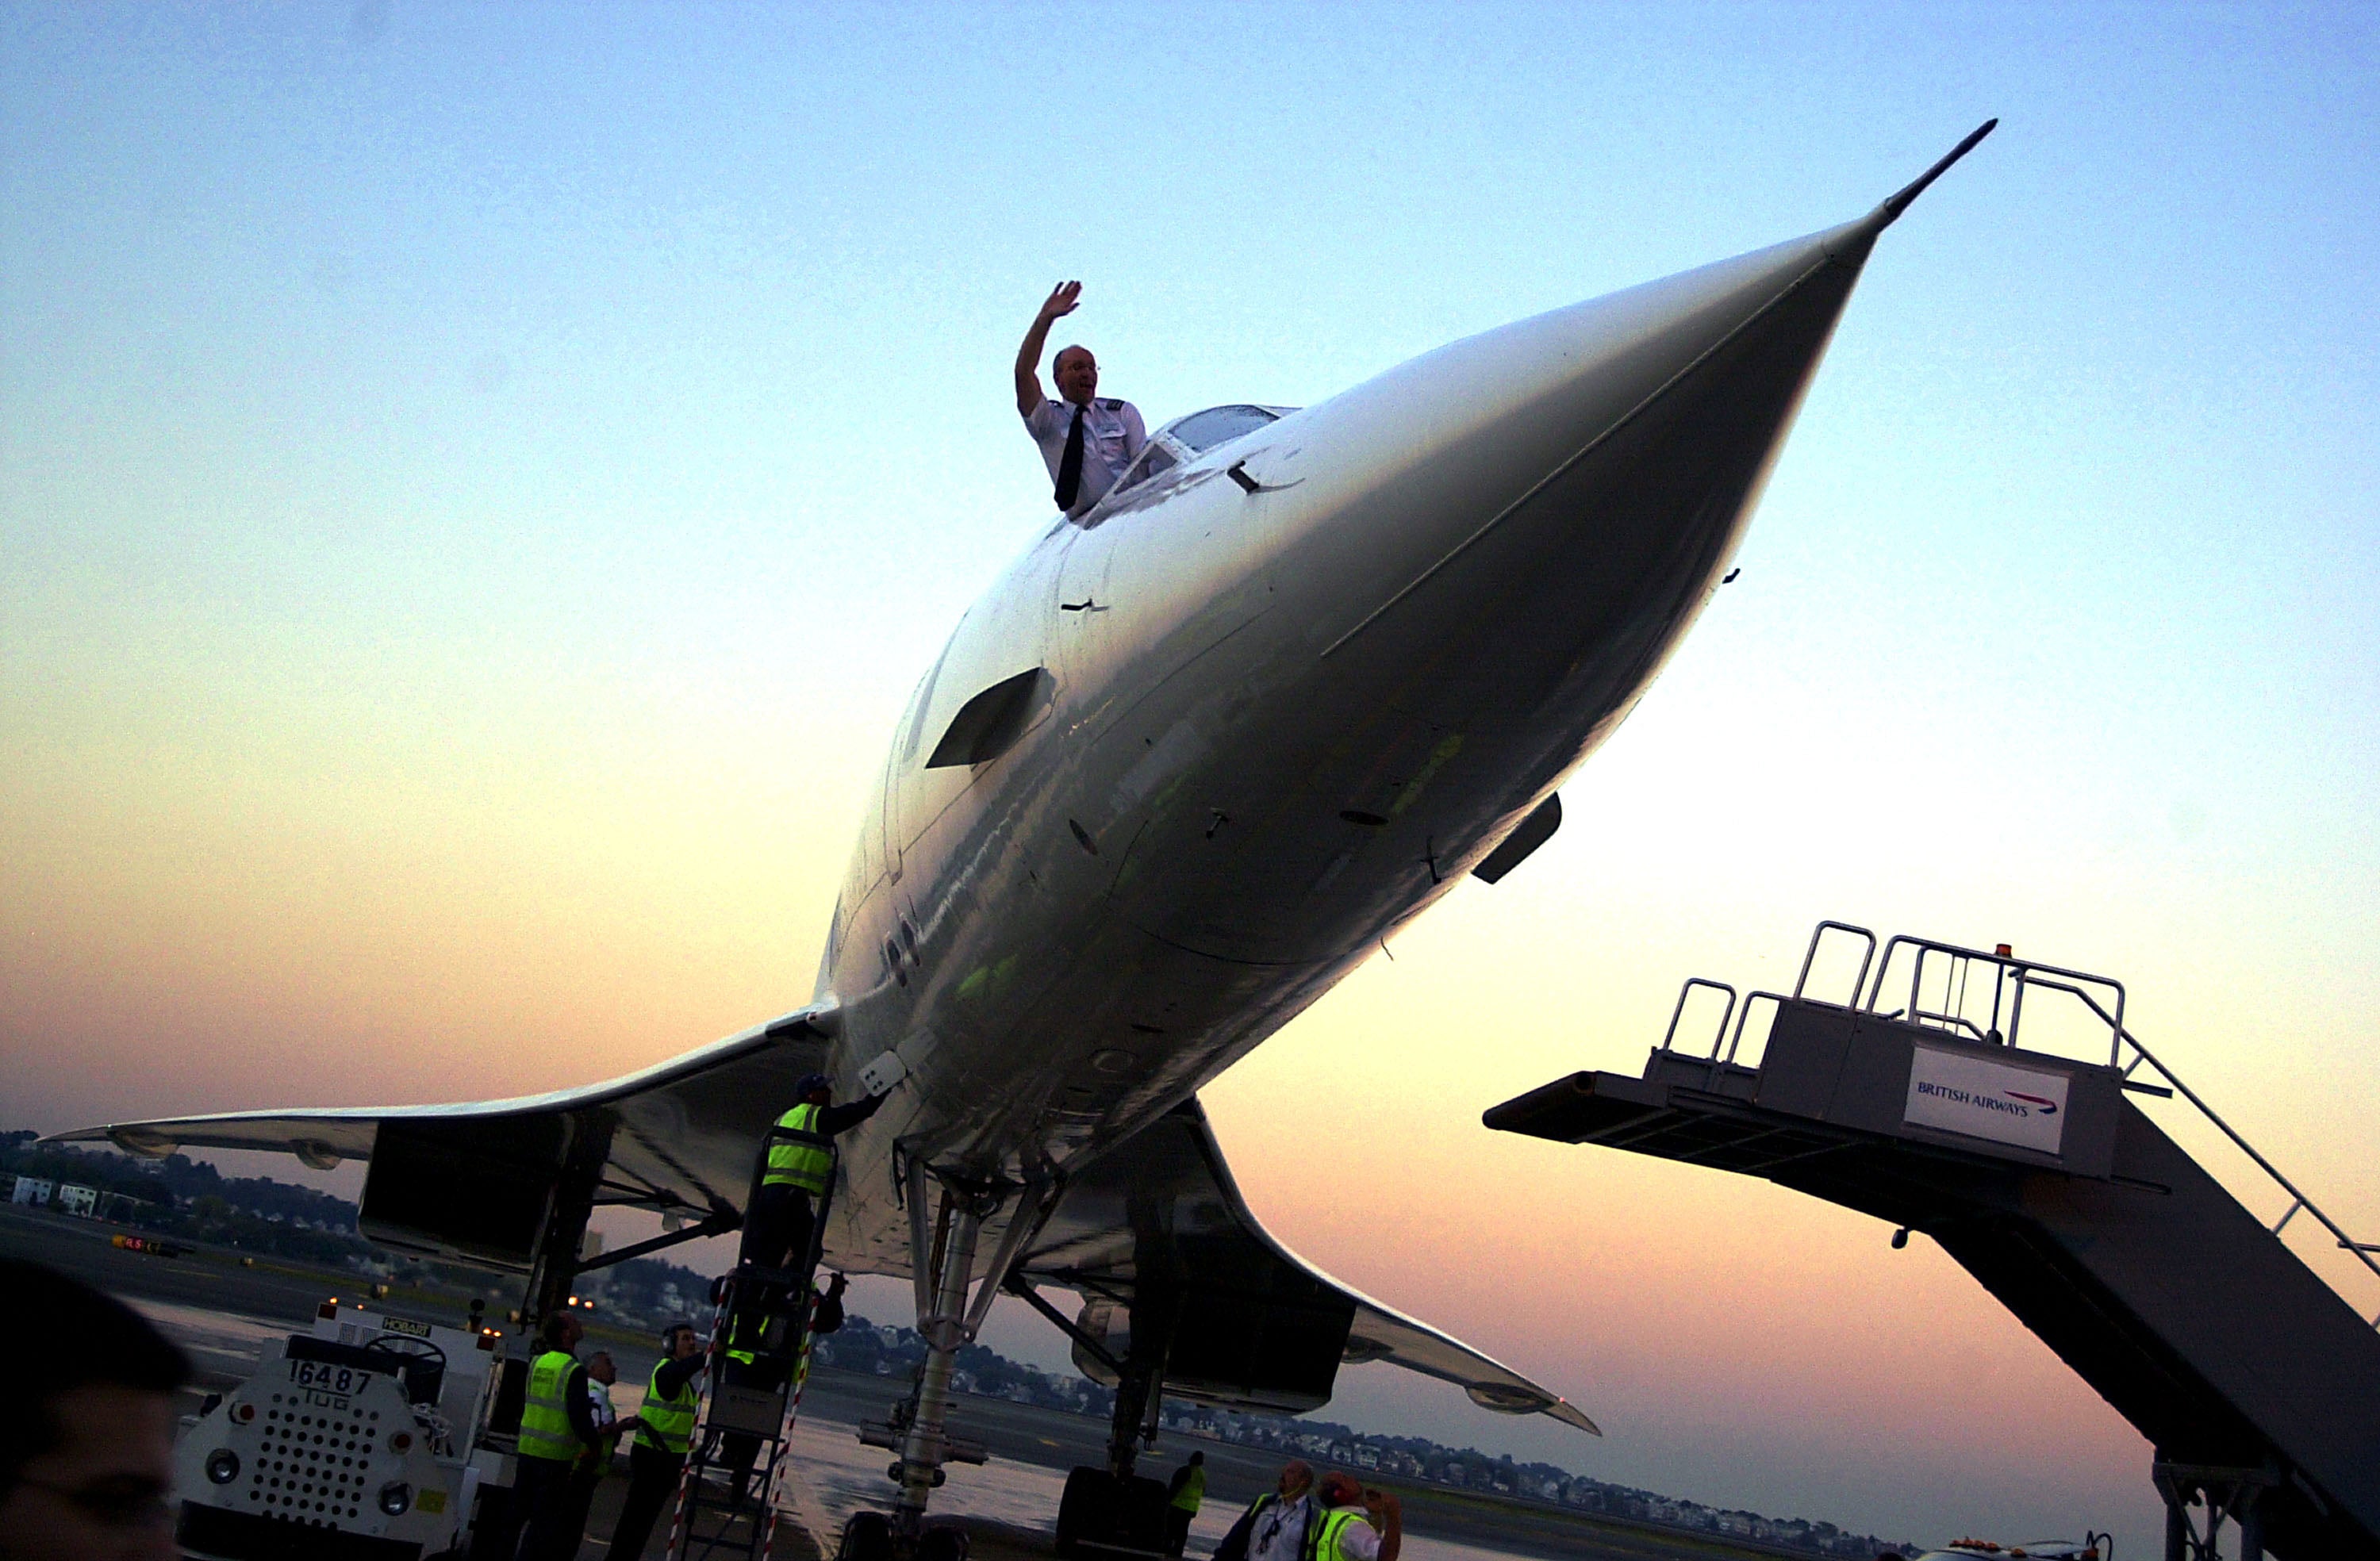 BA Concorde arrives at Boston, Massachusetts, in 2003 – a farewell visit before the fleet was taken out of service